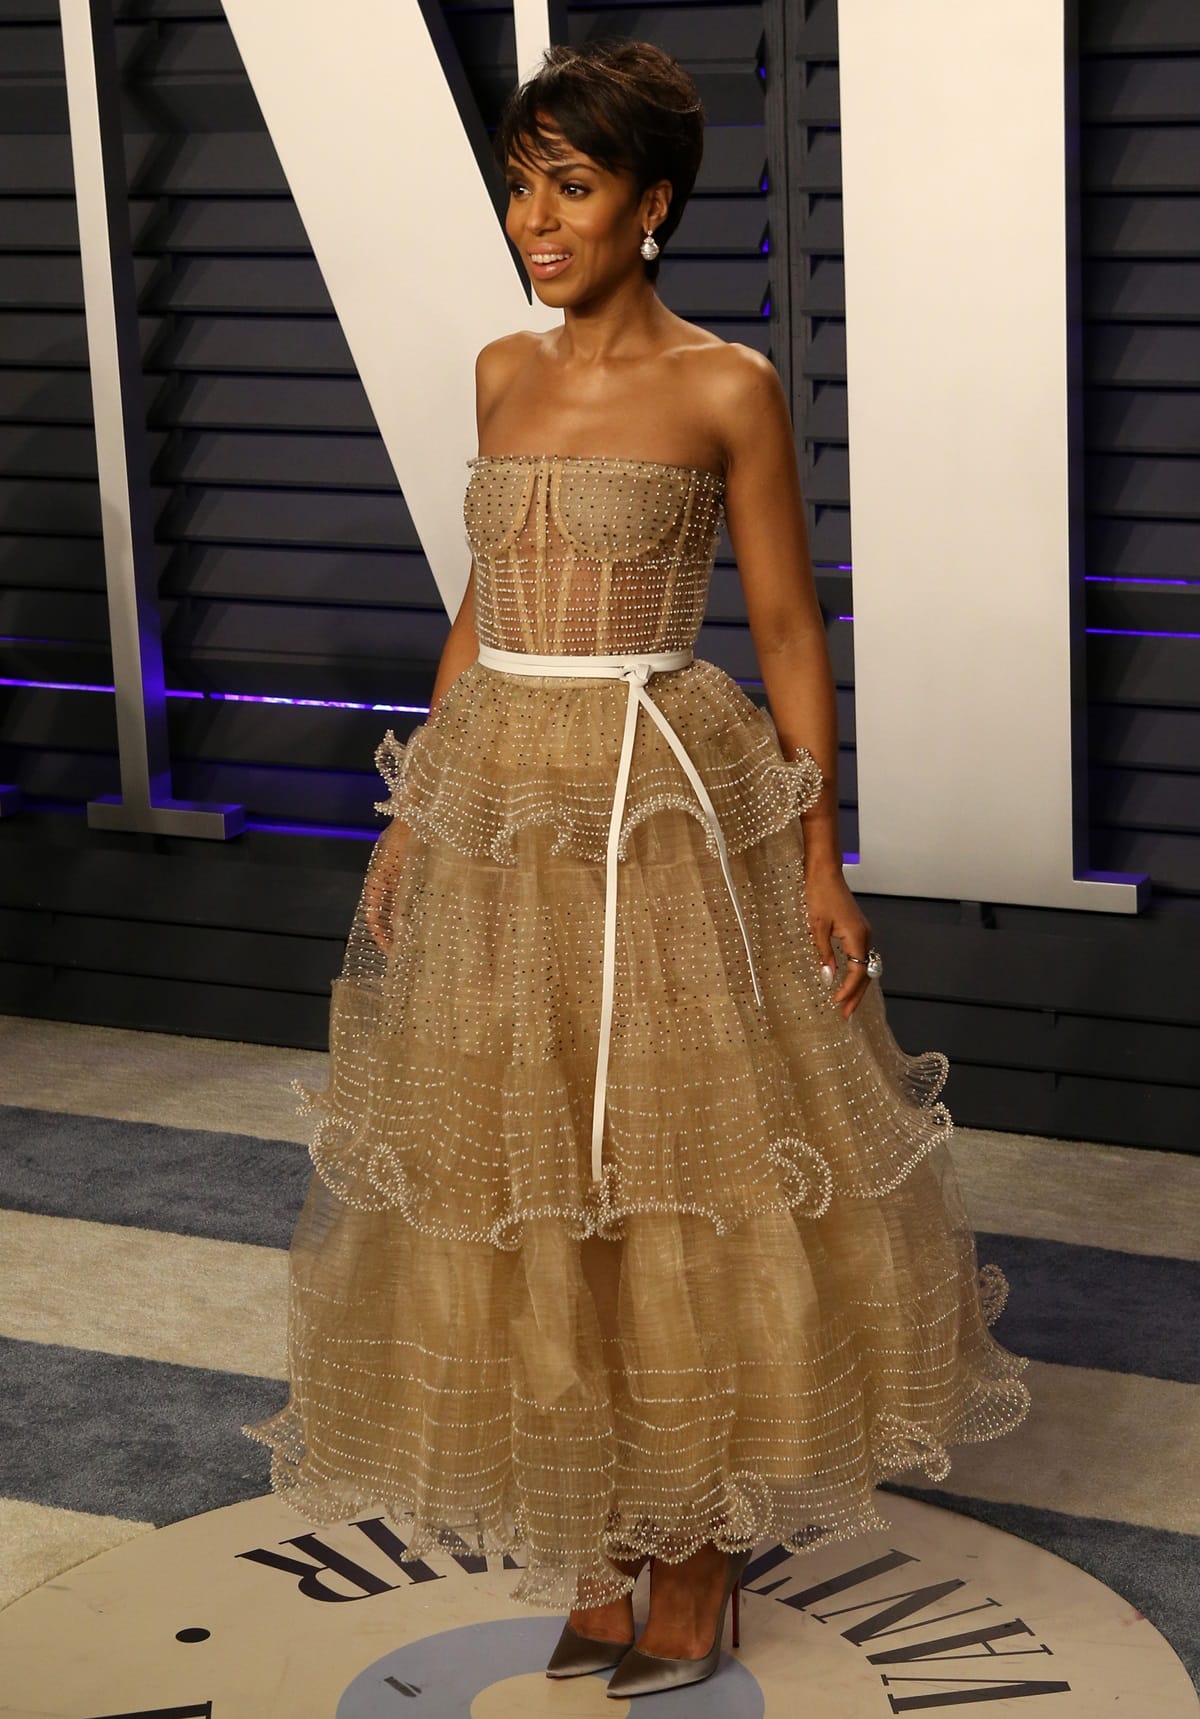 Kerry Washington turned heads at the 2019 Vanity Fair Oscar Party in a stunning neutral-toned knitted strapless dress by Schiaparelli